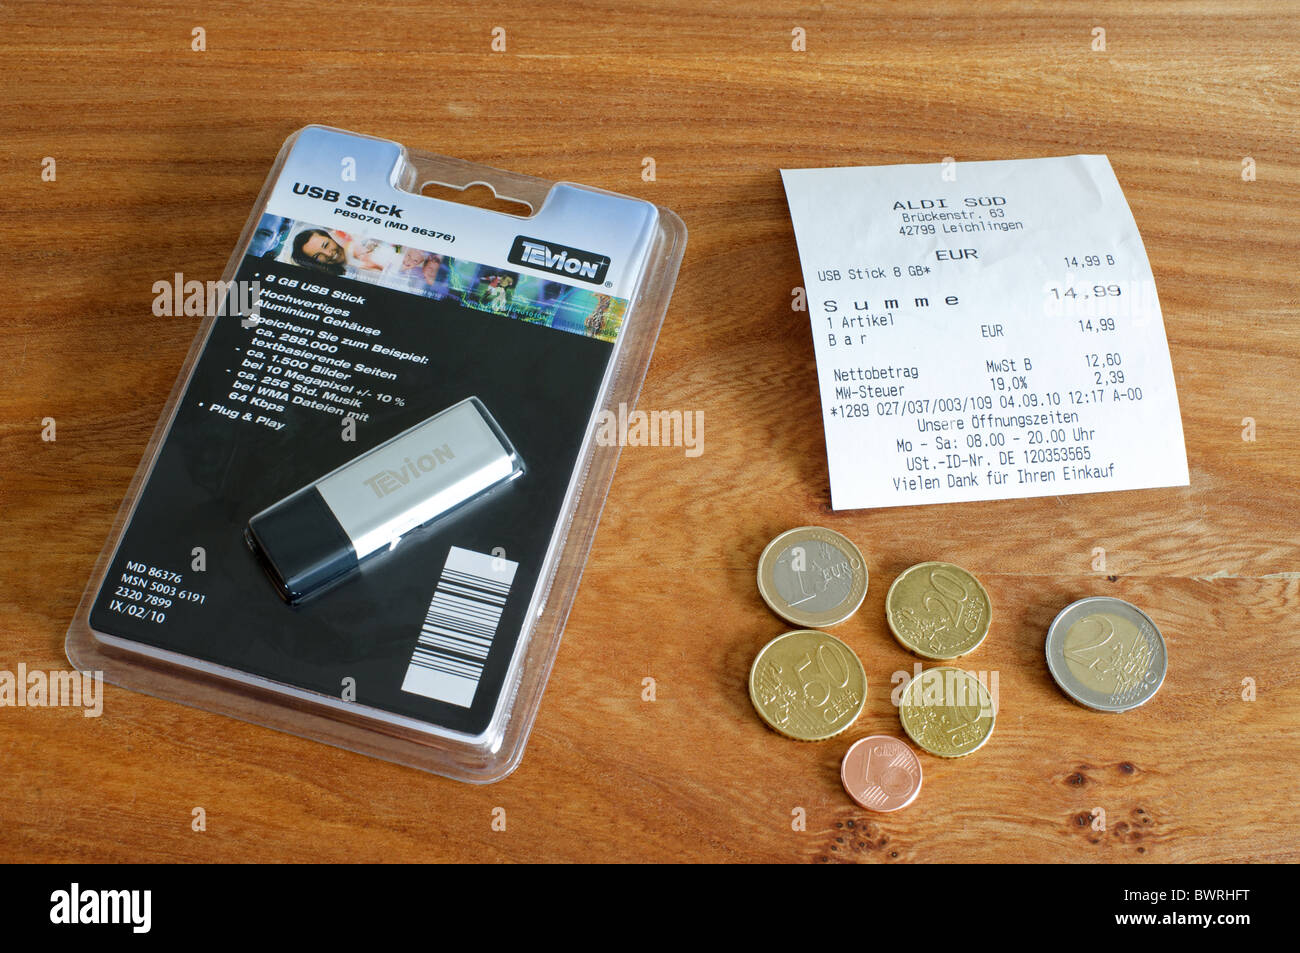 ægtemand sten facet Tevion USB stick brought from Aldi supermarket in Germany Stock Photo -  Alamy